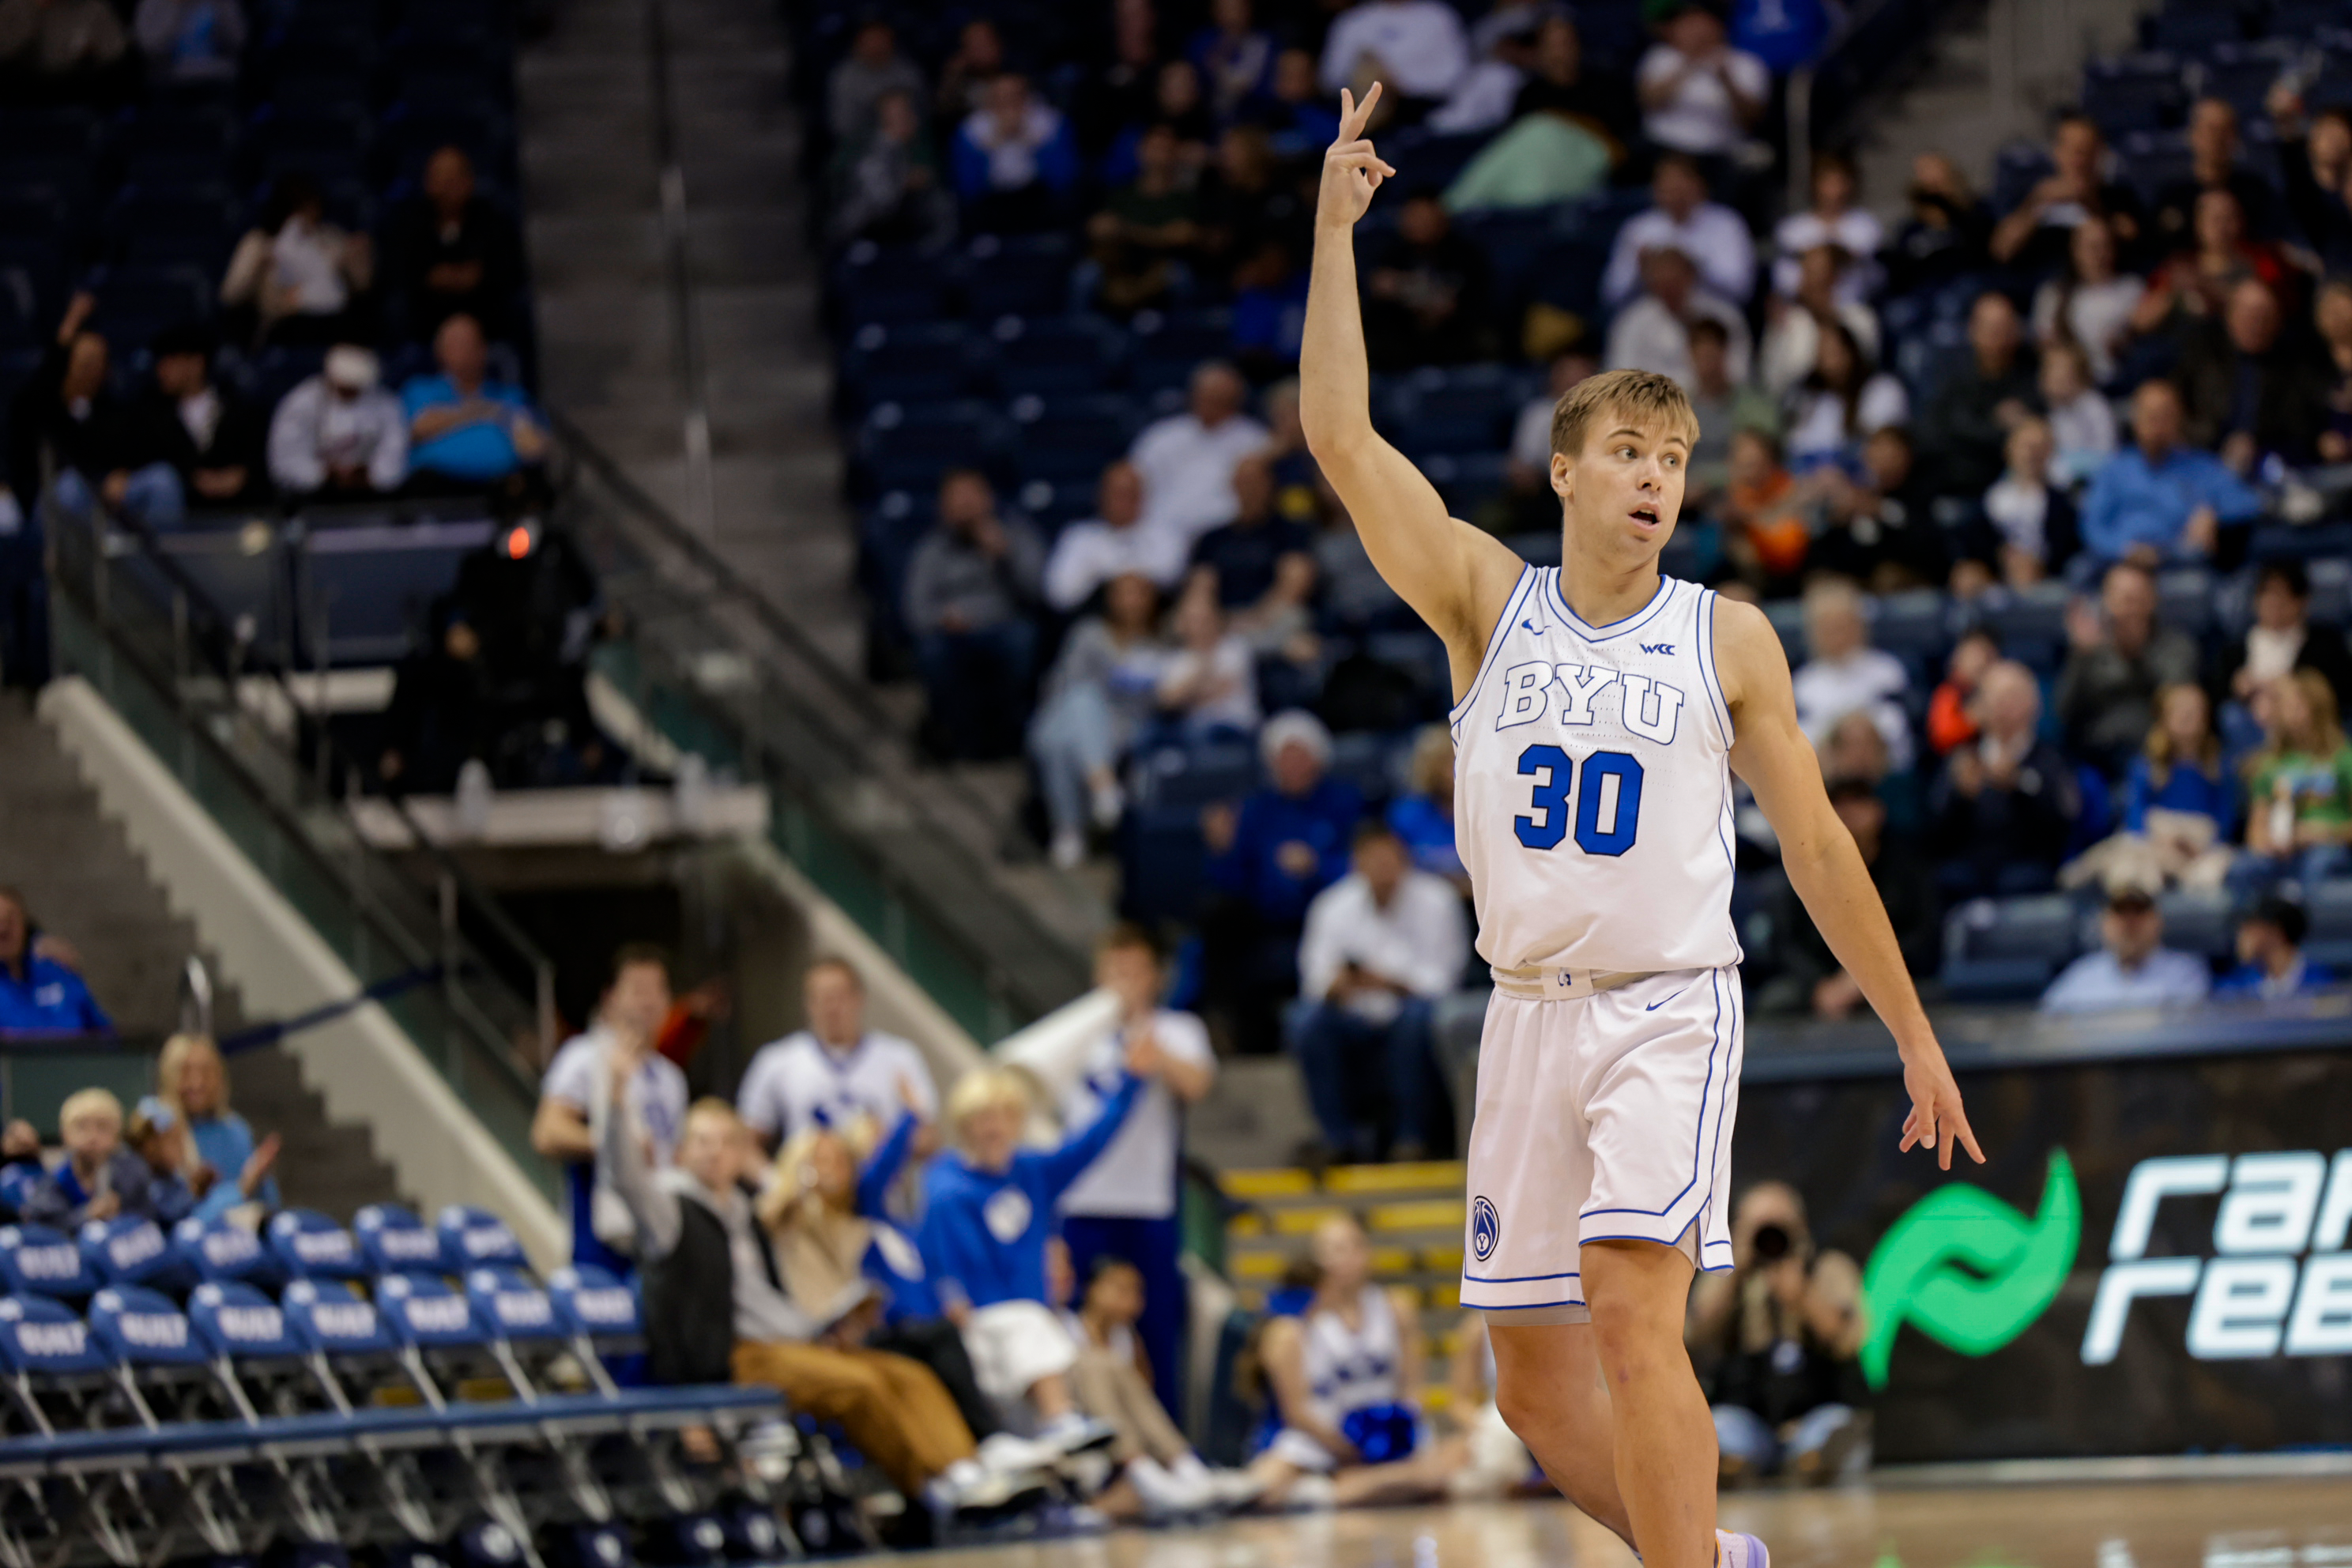 Dallin Hall celebrates after hitting a three during a game against Western Oregon at the Marriott Center.